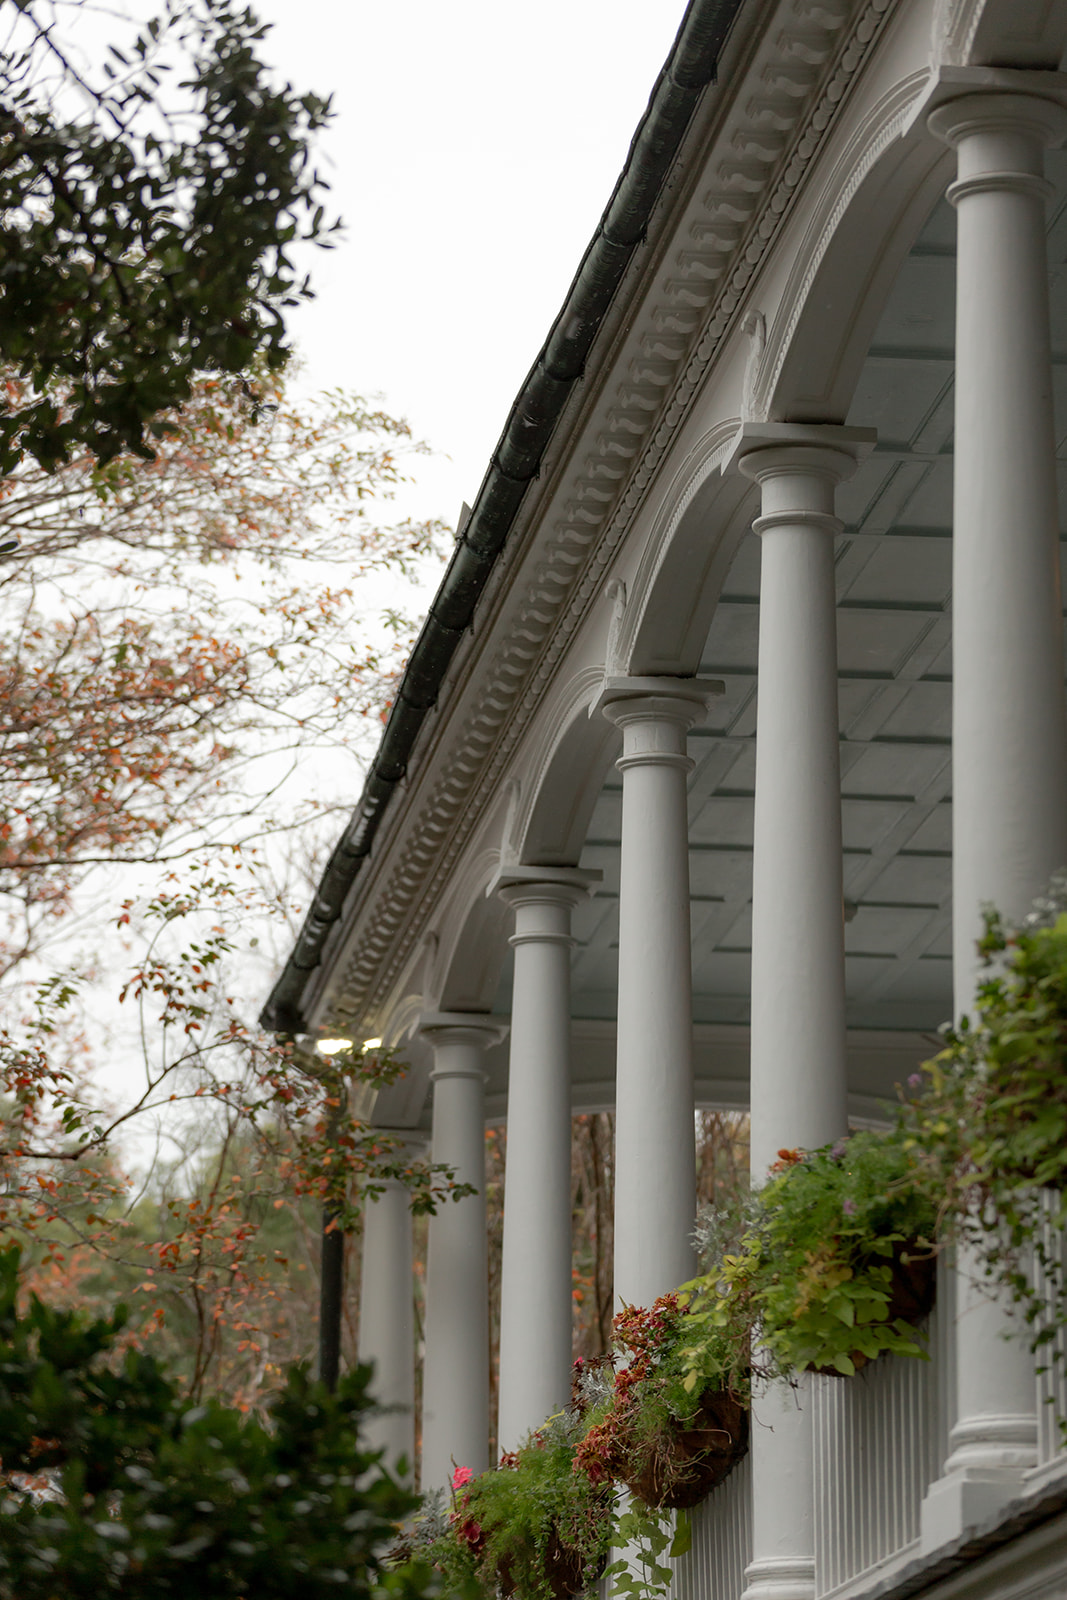 Wedding at Gov. Thomas Bennett House. White Classical Revival columns at colonial house